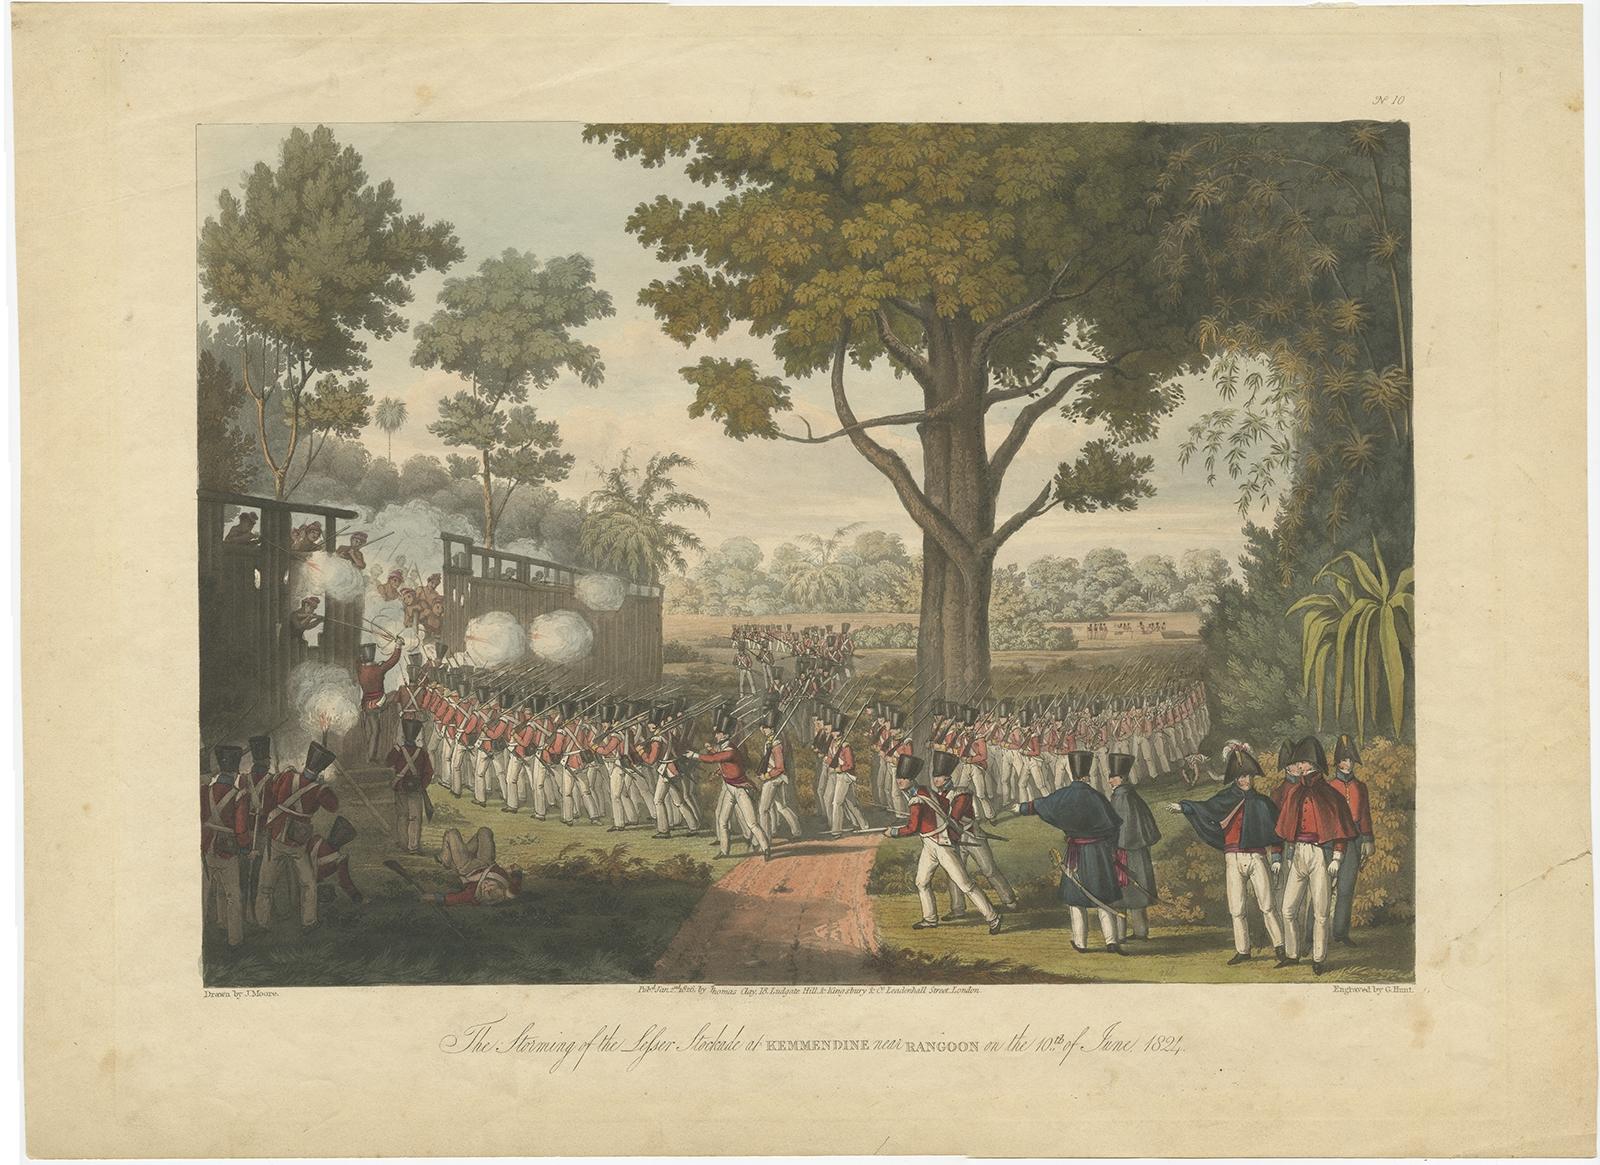 Antique print titled 'The storming of the lesser Stockade at Kemmendine near Rangoon on the 10th of July 1824'. 

This print originates from 